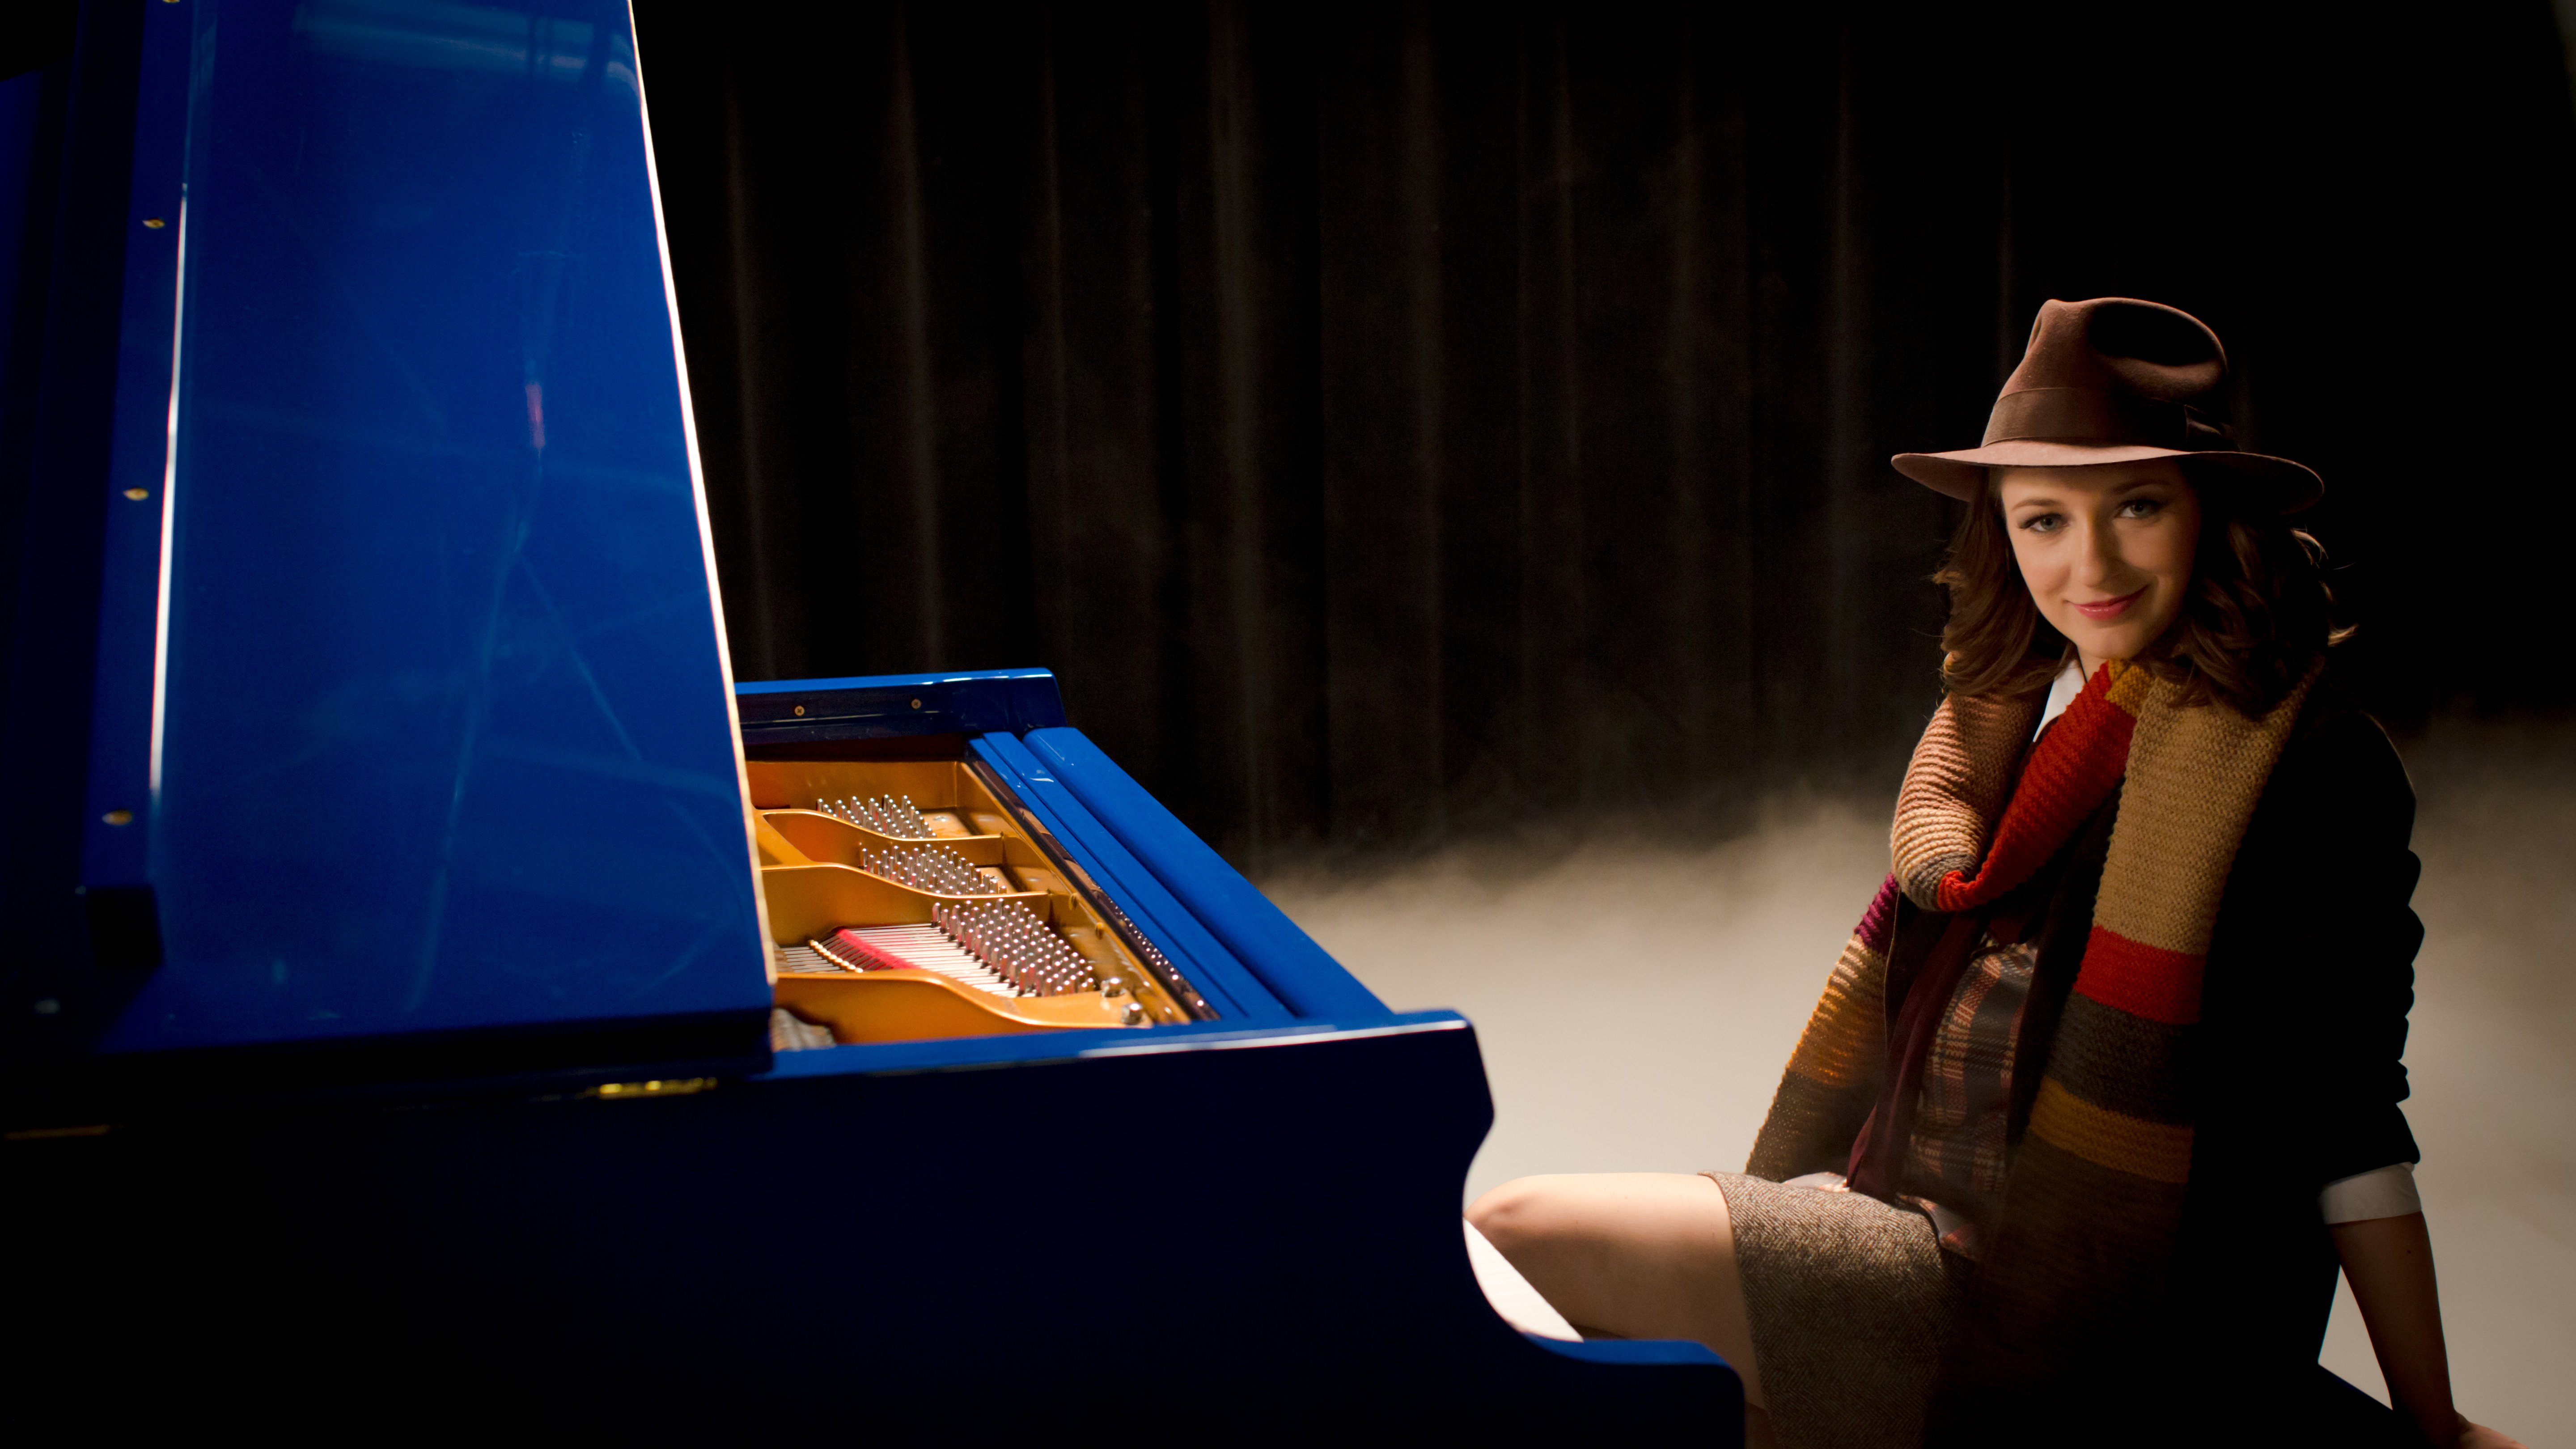 Look she plays the piano